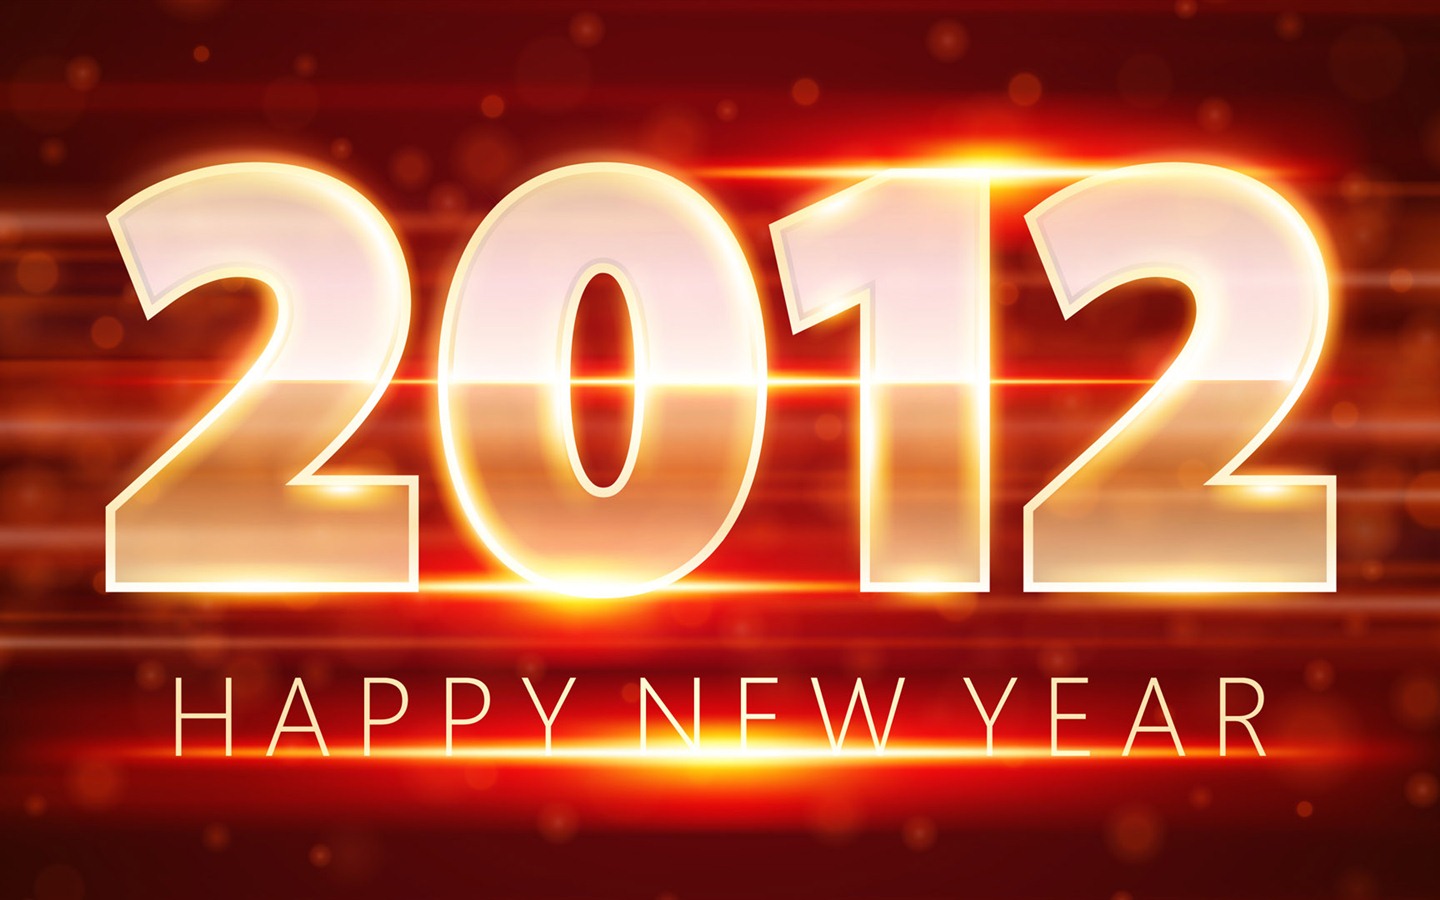 2012 New Year wallpapers (1) #2 - 1440x900